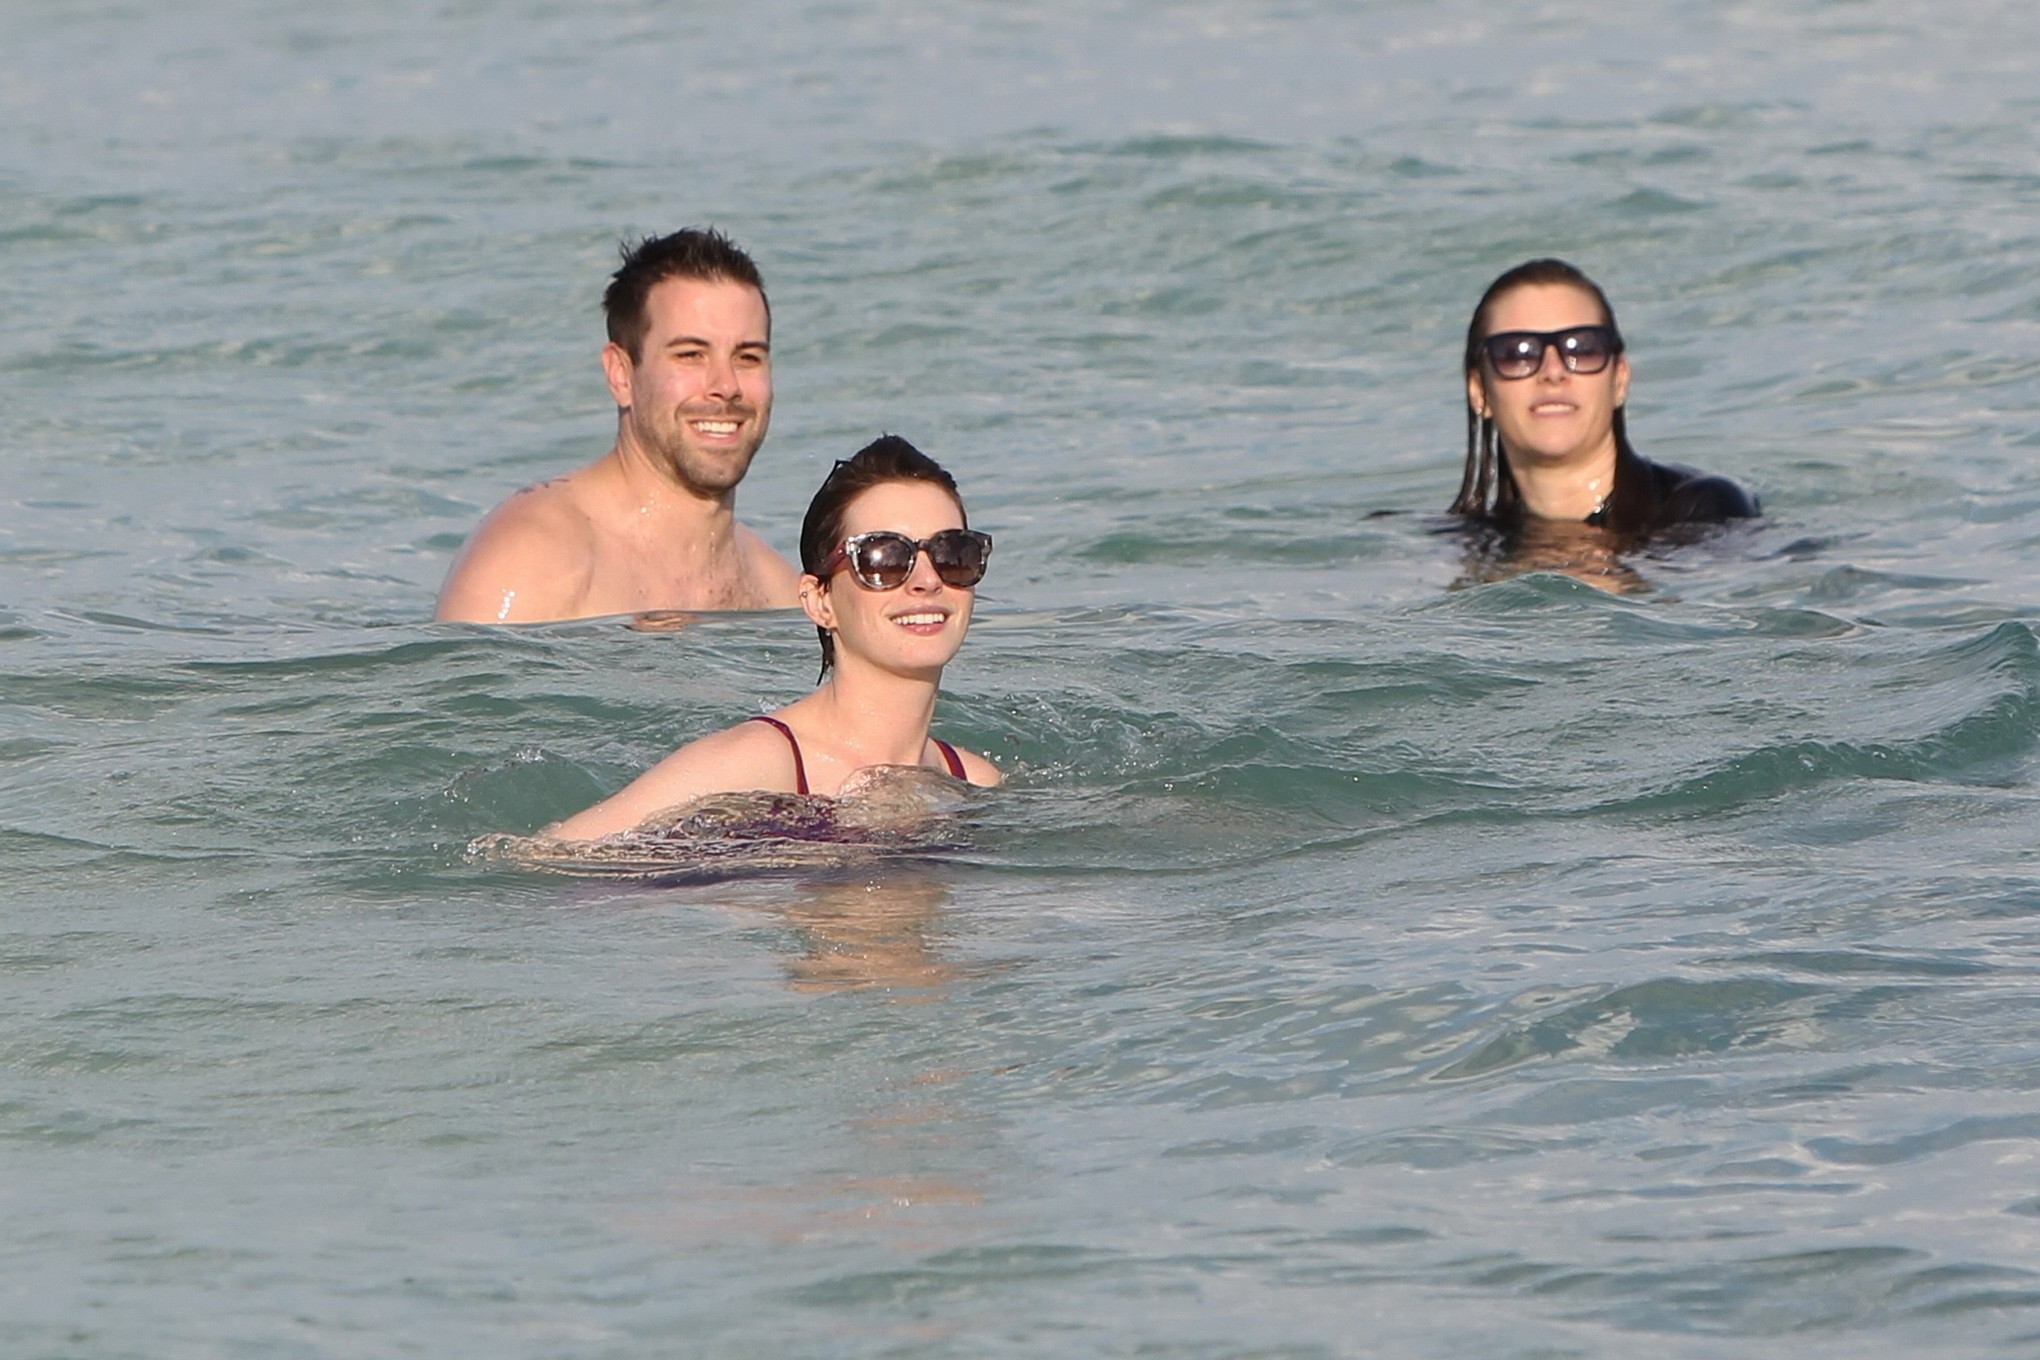 Anne Hathaway wearing wet purple see-through swimsuit and shorts at the beach in #75200940